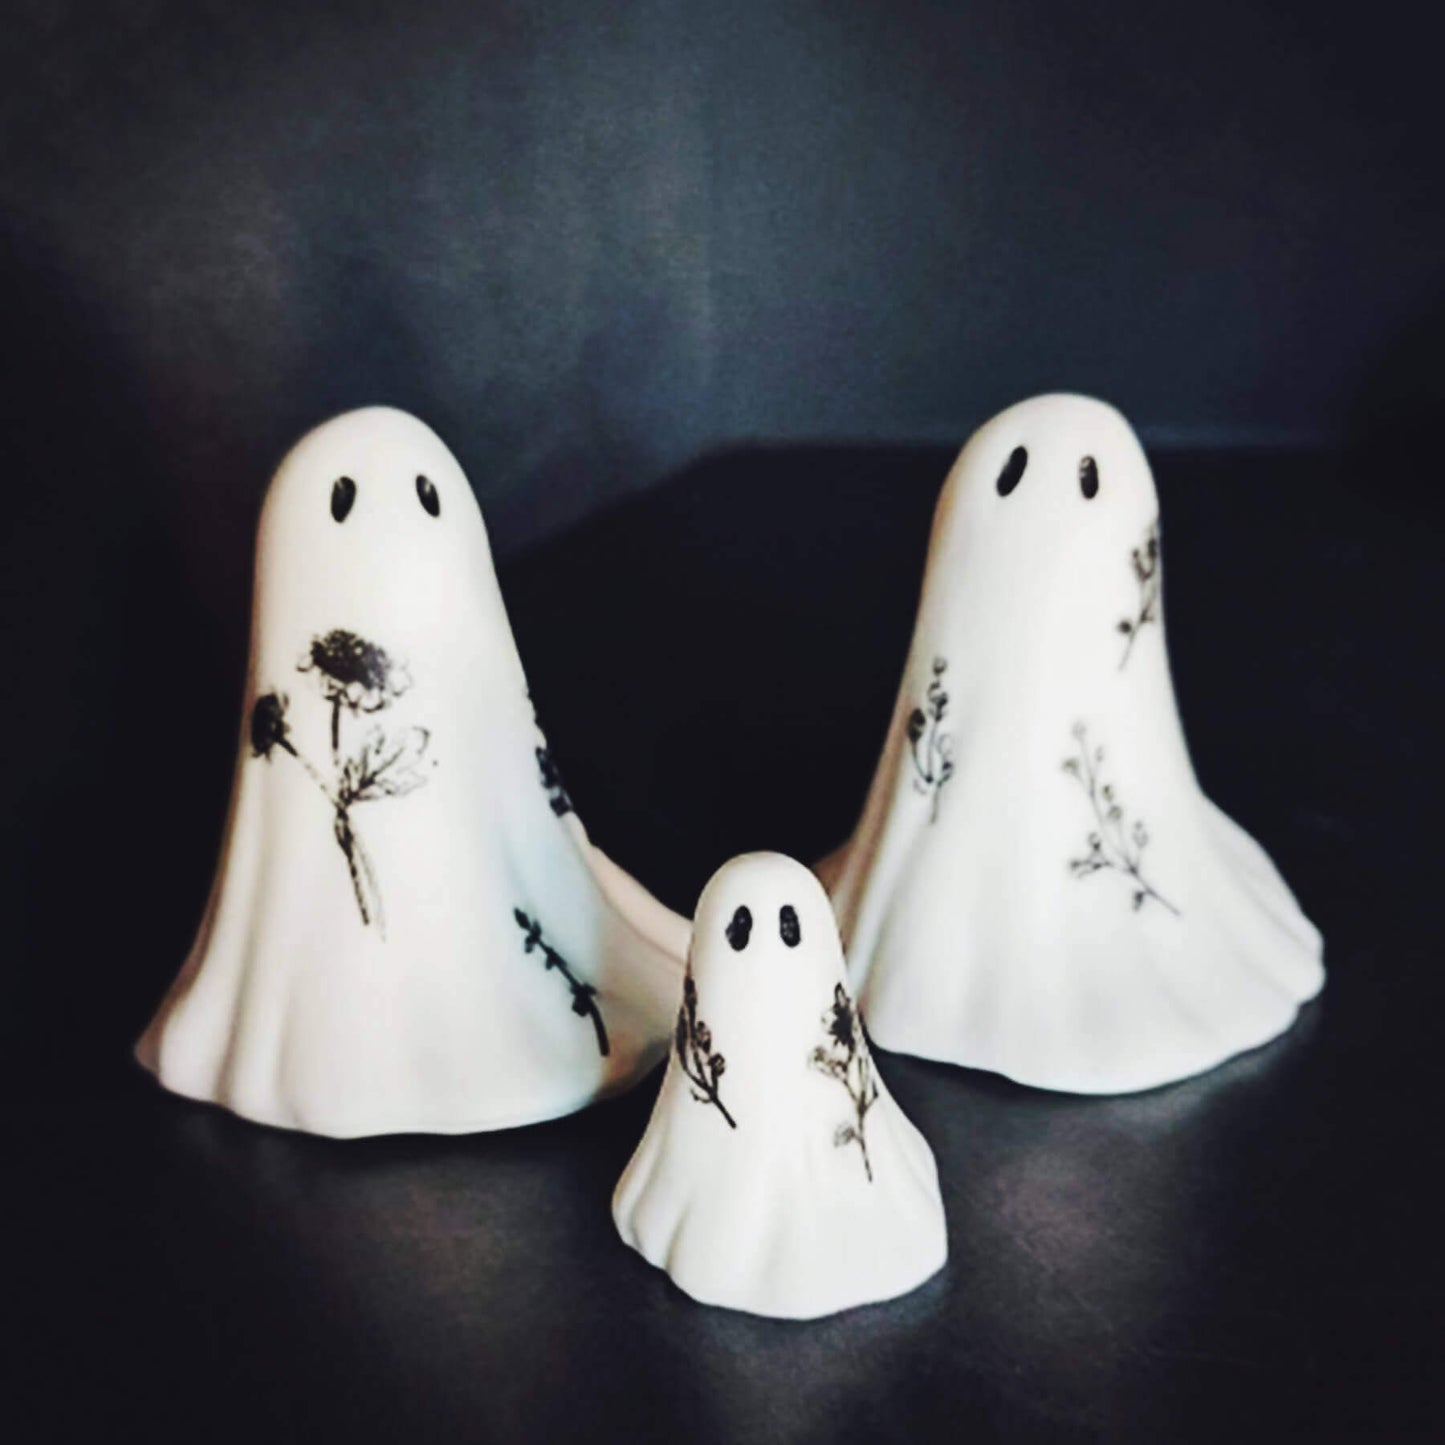 GHOST FAMILY - Spooky Resin Ornaments